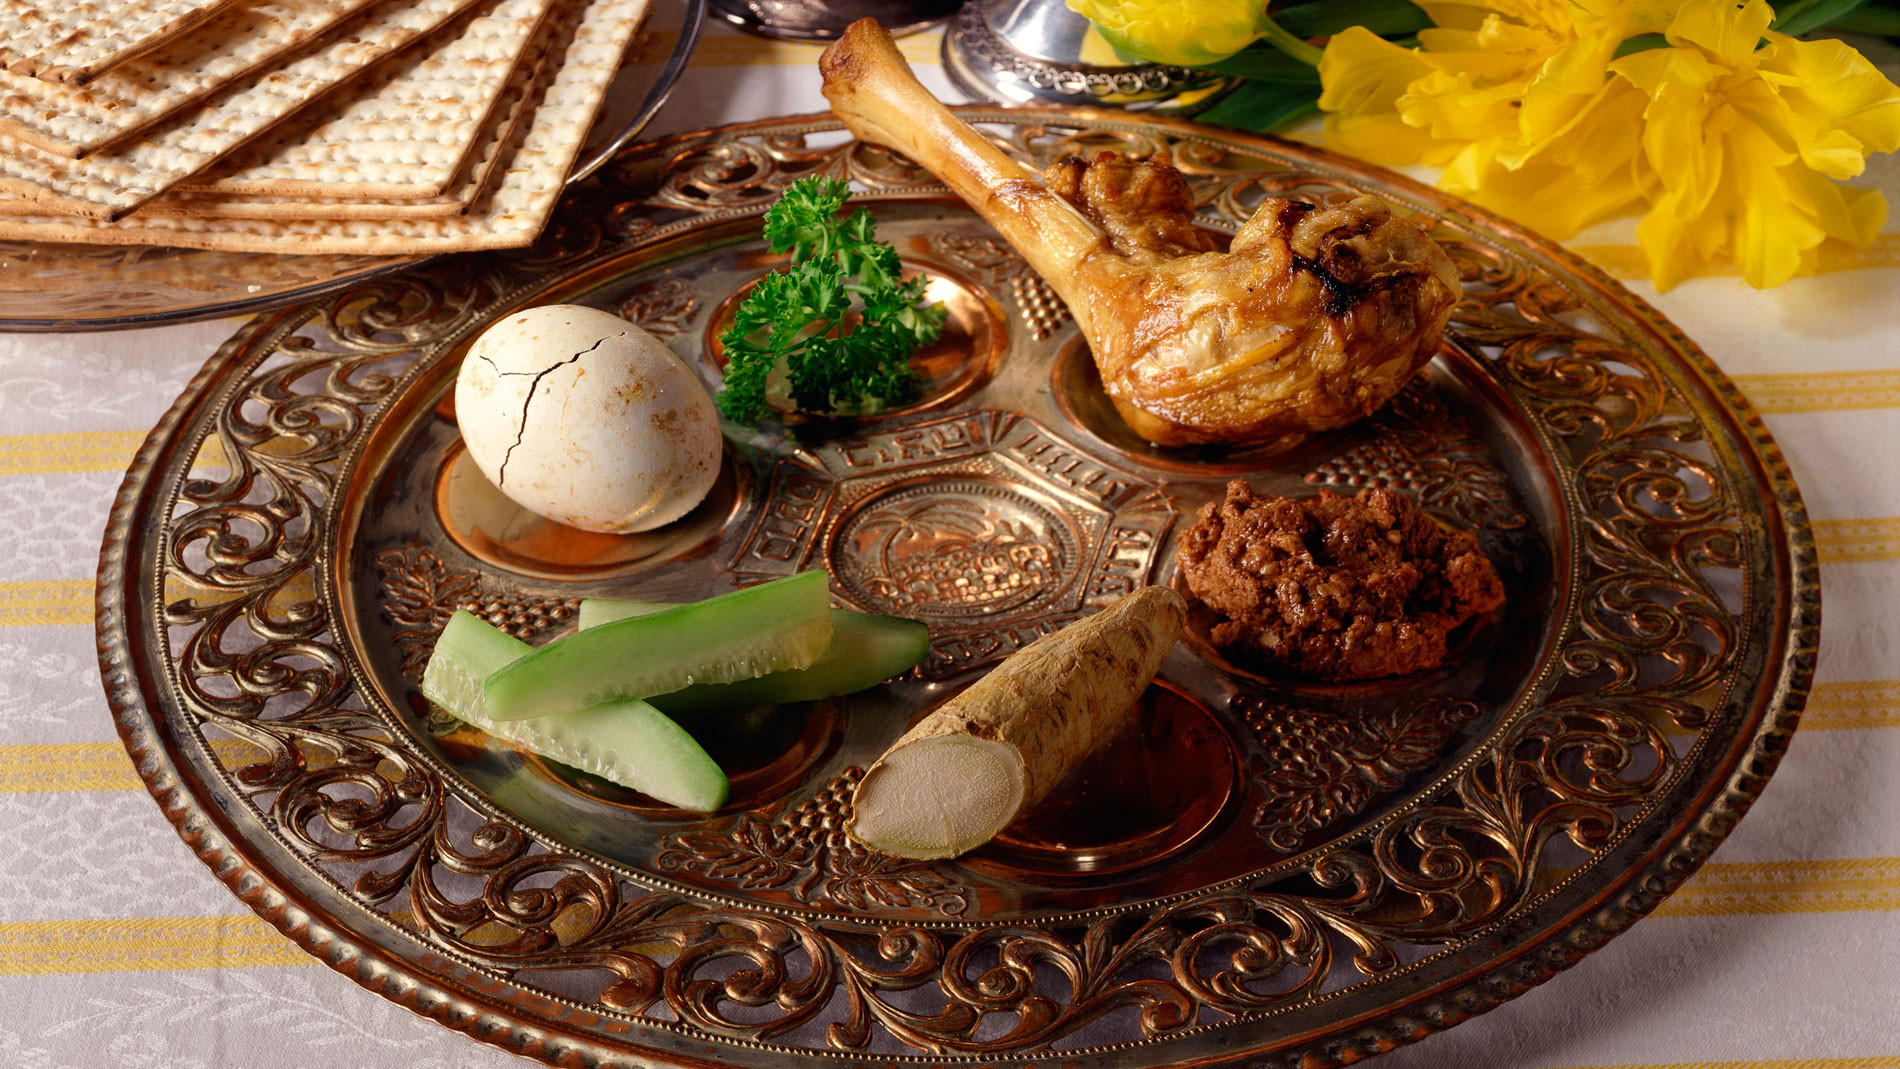 Passover Food
 The Best Passover Foods According to F&W Staff